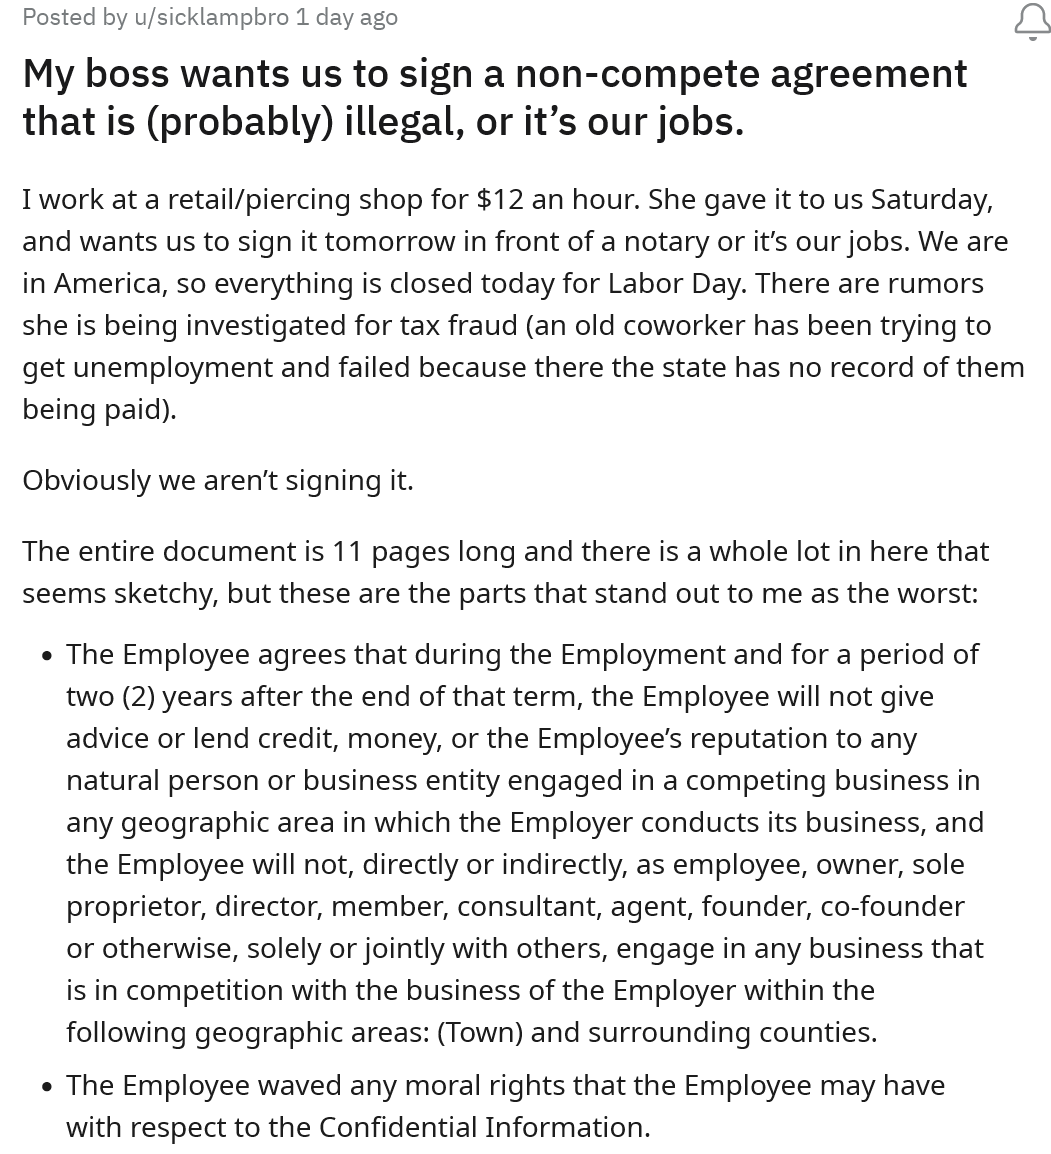 Boss Wants Employees to Sign a Non-Compete Agreement That Is (Probably) Illegal, or It’s Their Jobs